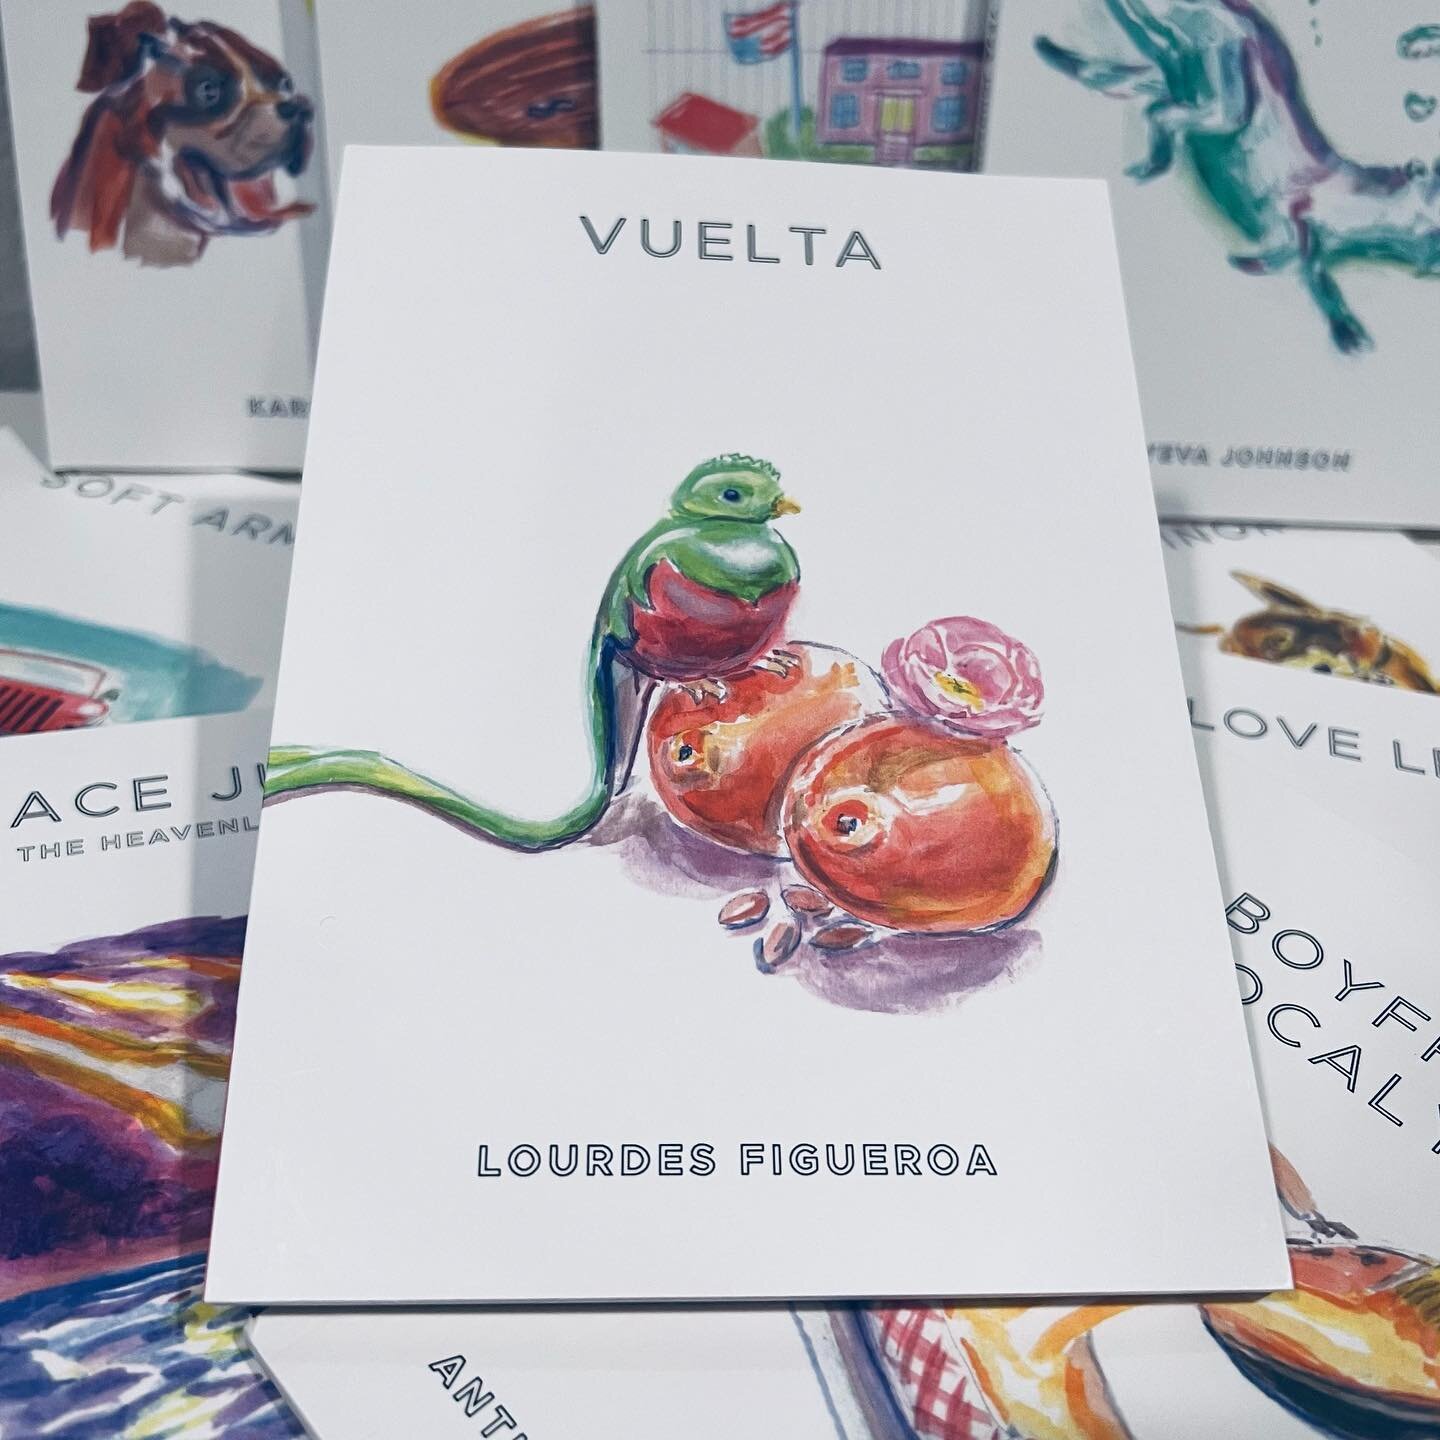 Congratulations to Lourdes Figueroa on the release of her chapbook VUELTA&mdash;out now! A long poem, Vuelta draws upon the author&rsquo;s background as an oral poet, as well as her migration-influenced sense of language and the world. &ldquo;It is a